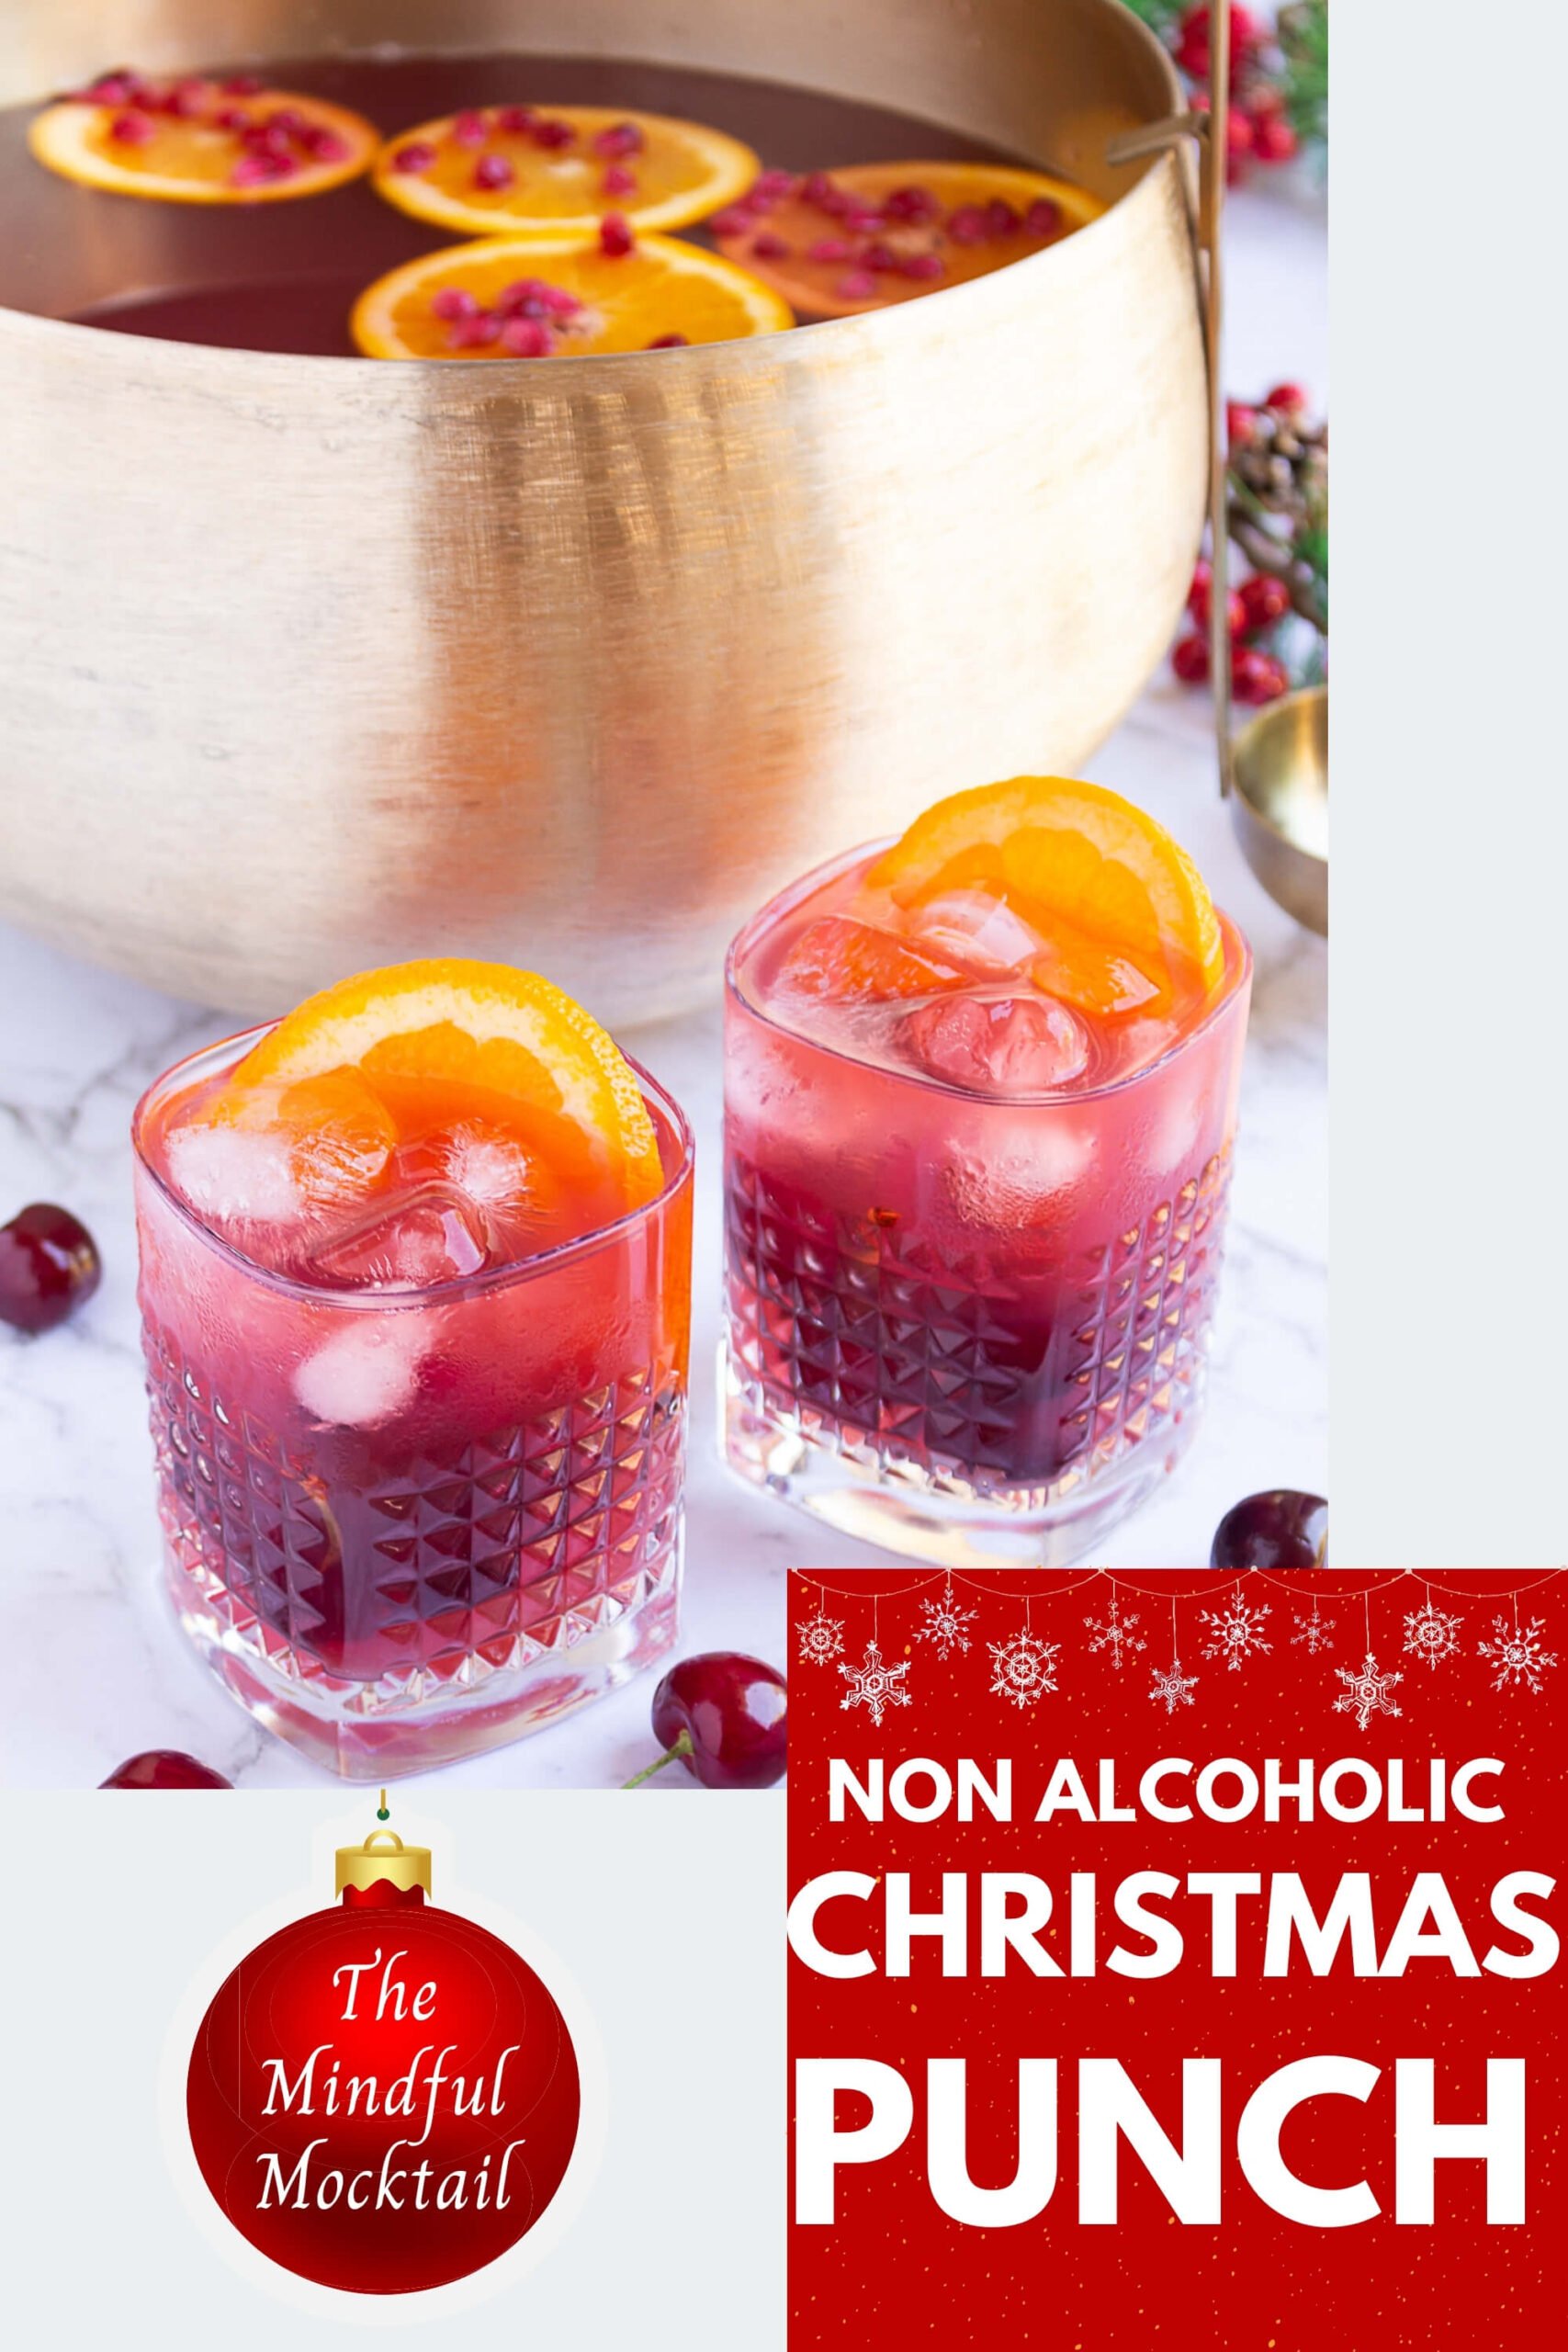 Non Alcoholic Christmas Punch For The Holidays - The Mindful Mocktail